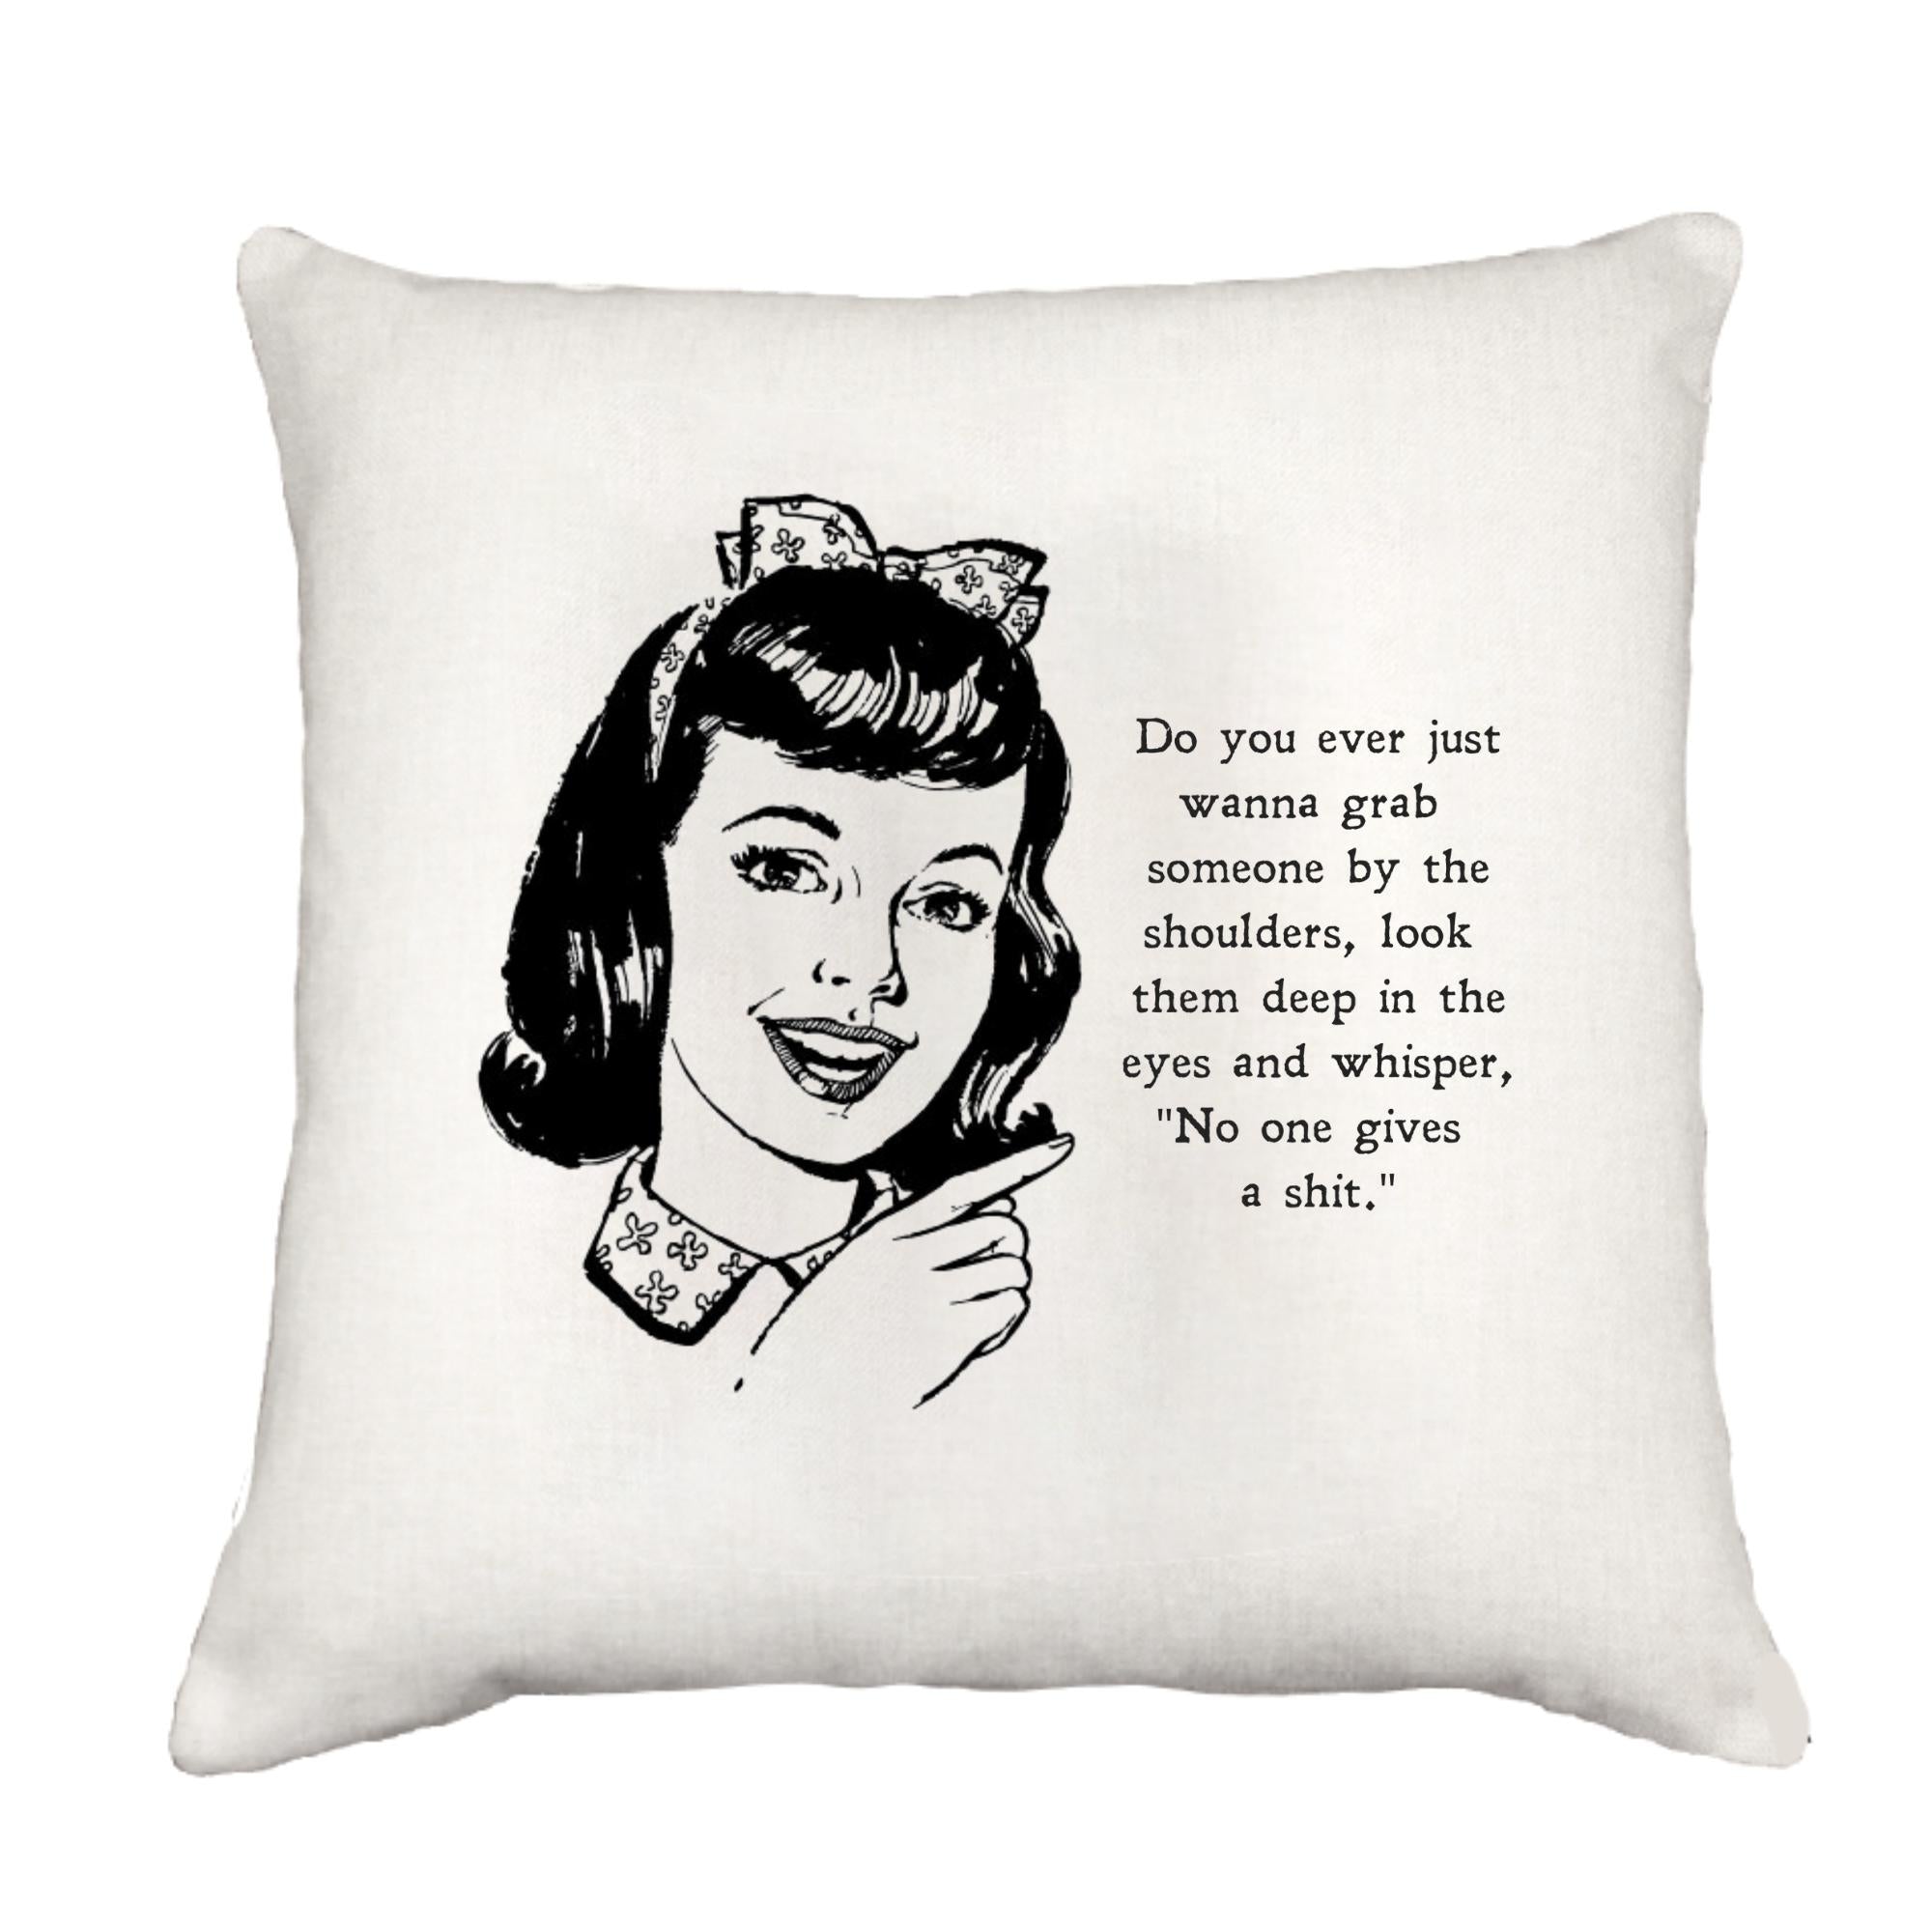 No One Gives Cottage Pillow Throw/Decorative Pillow - Southern Sisters